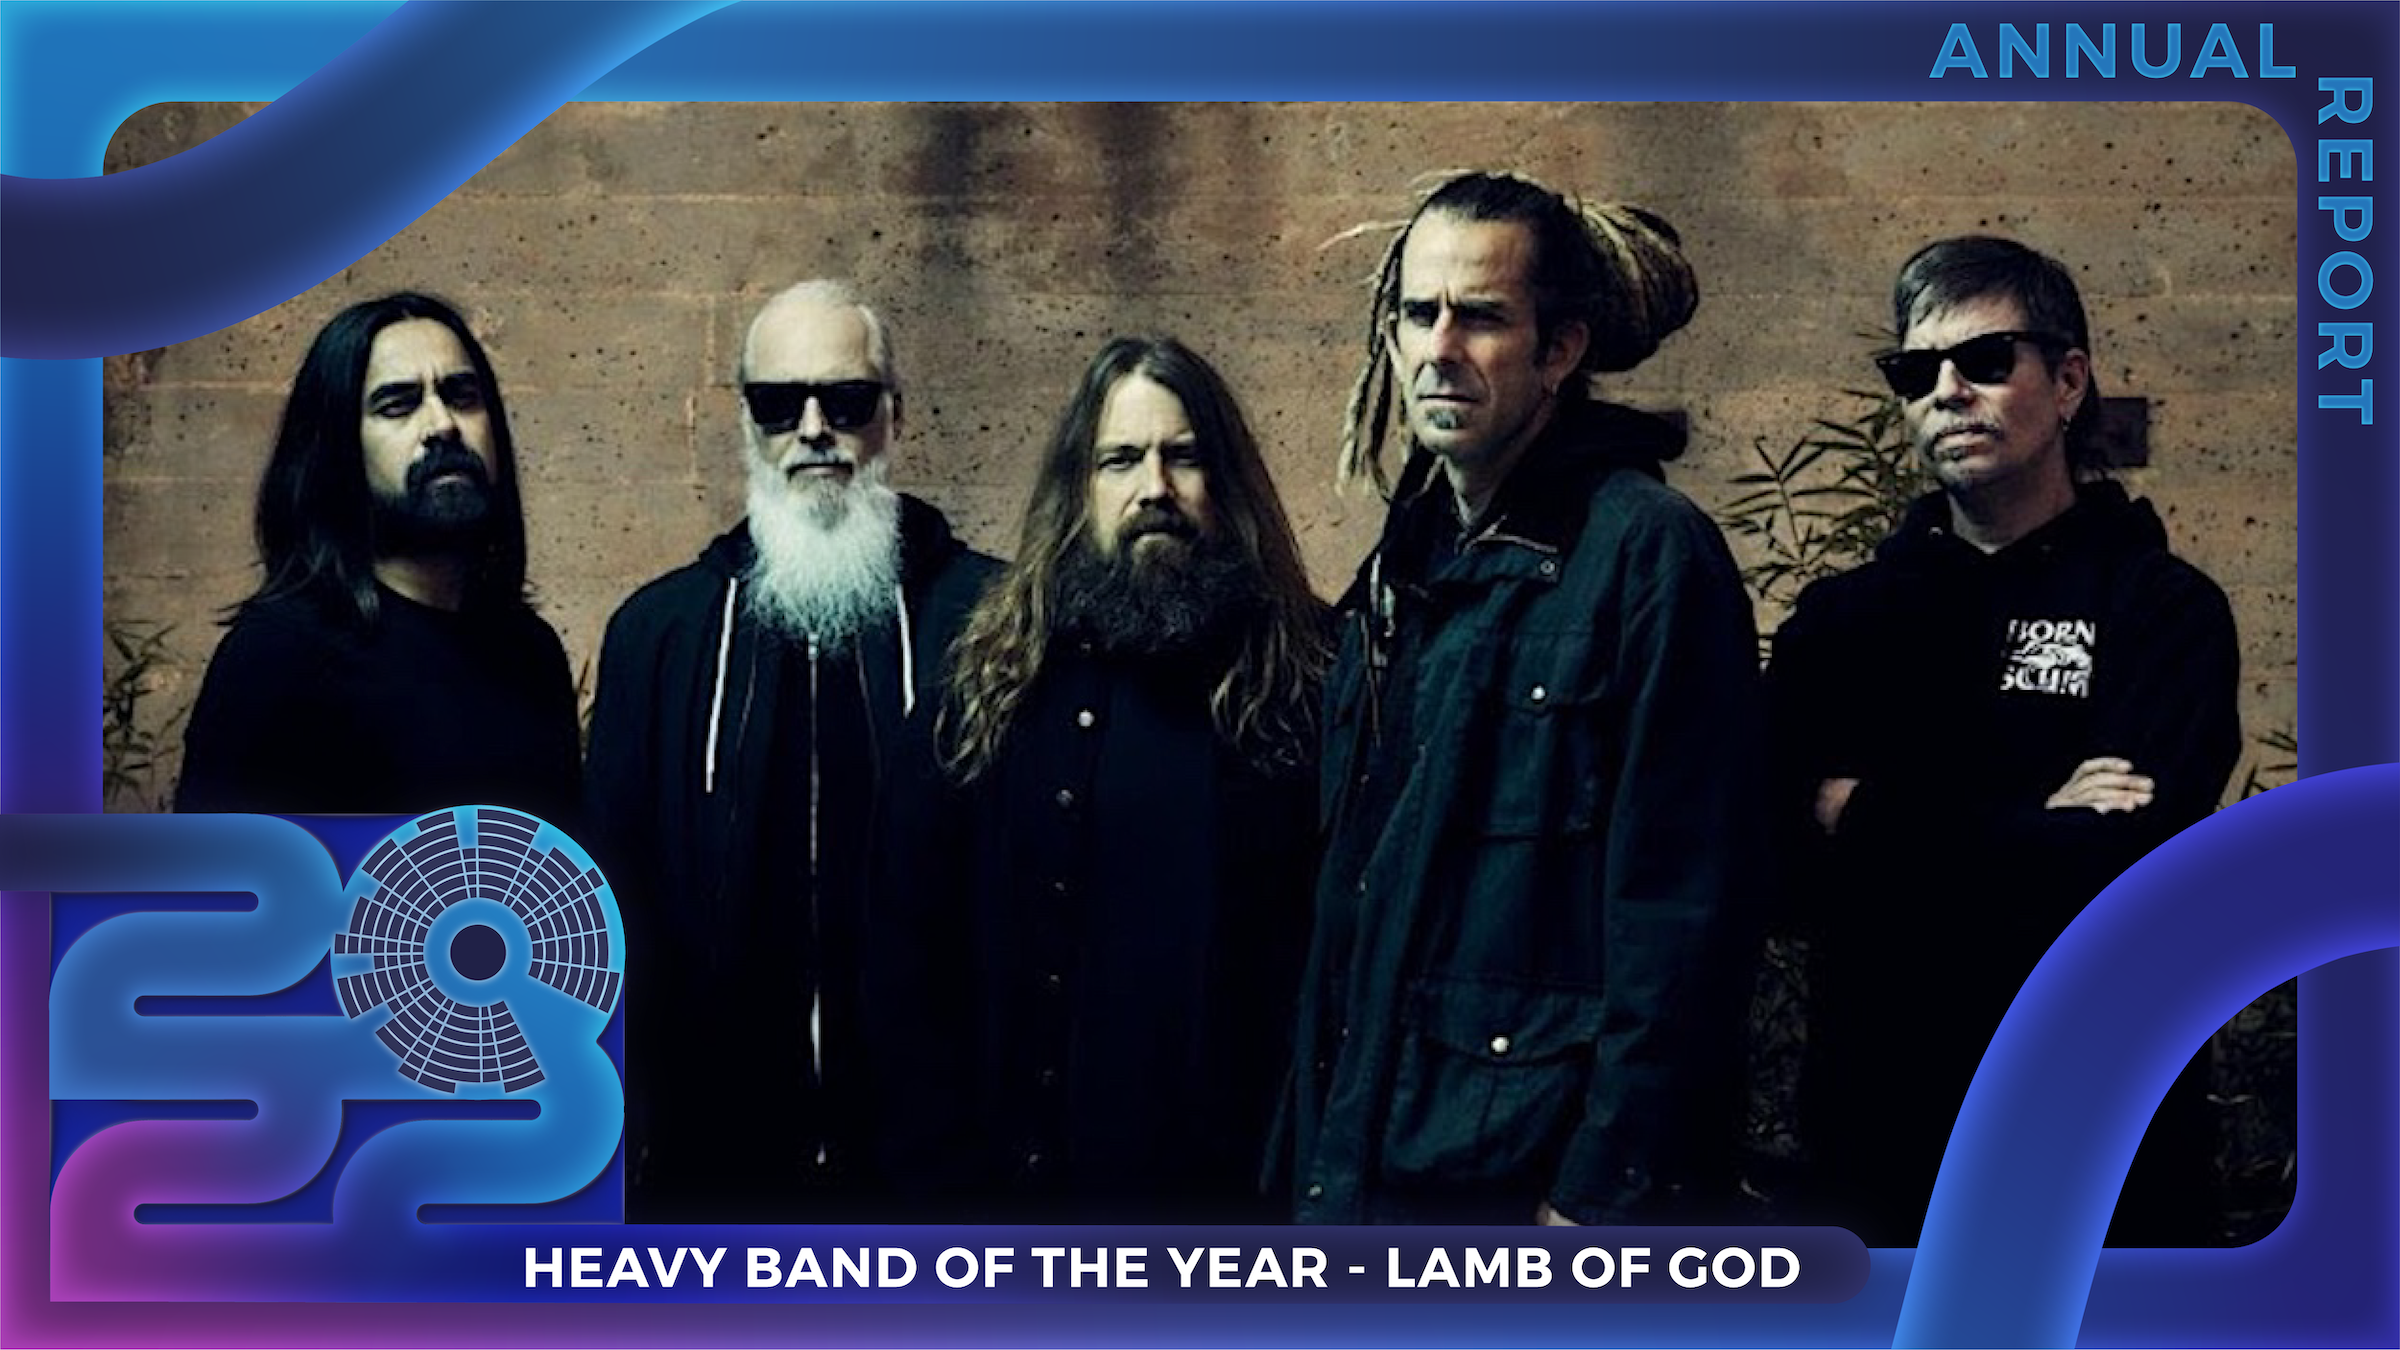 2022 Heavy Band of the Year Lamb of God on Touring, Recording, Legacy, and More